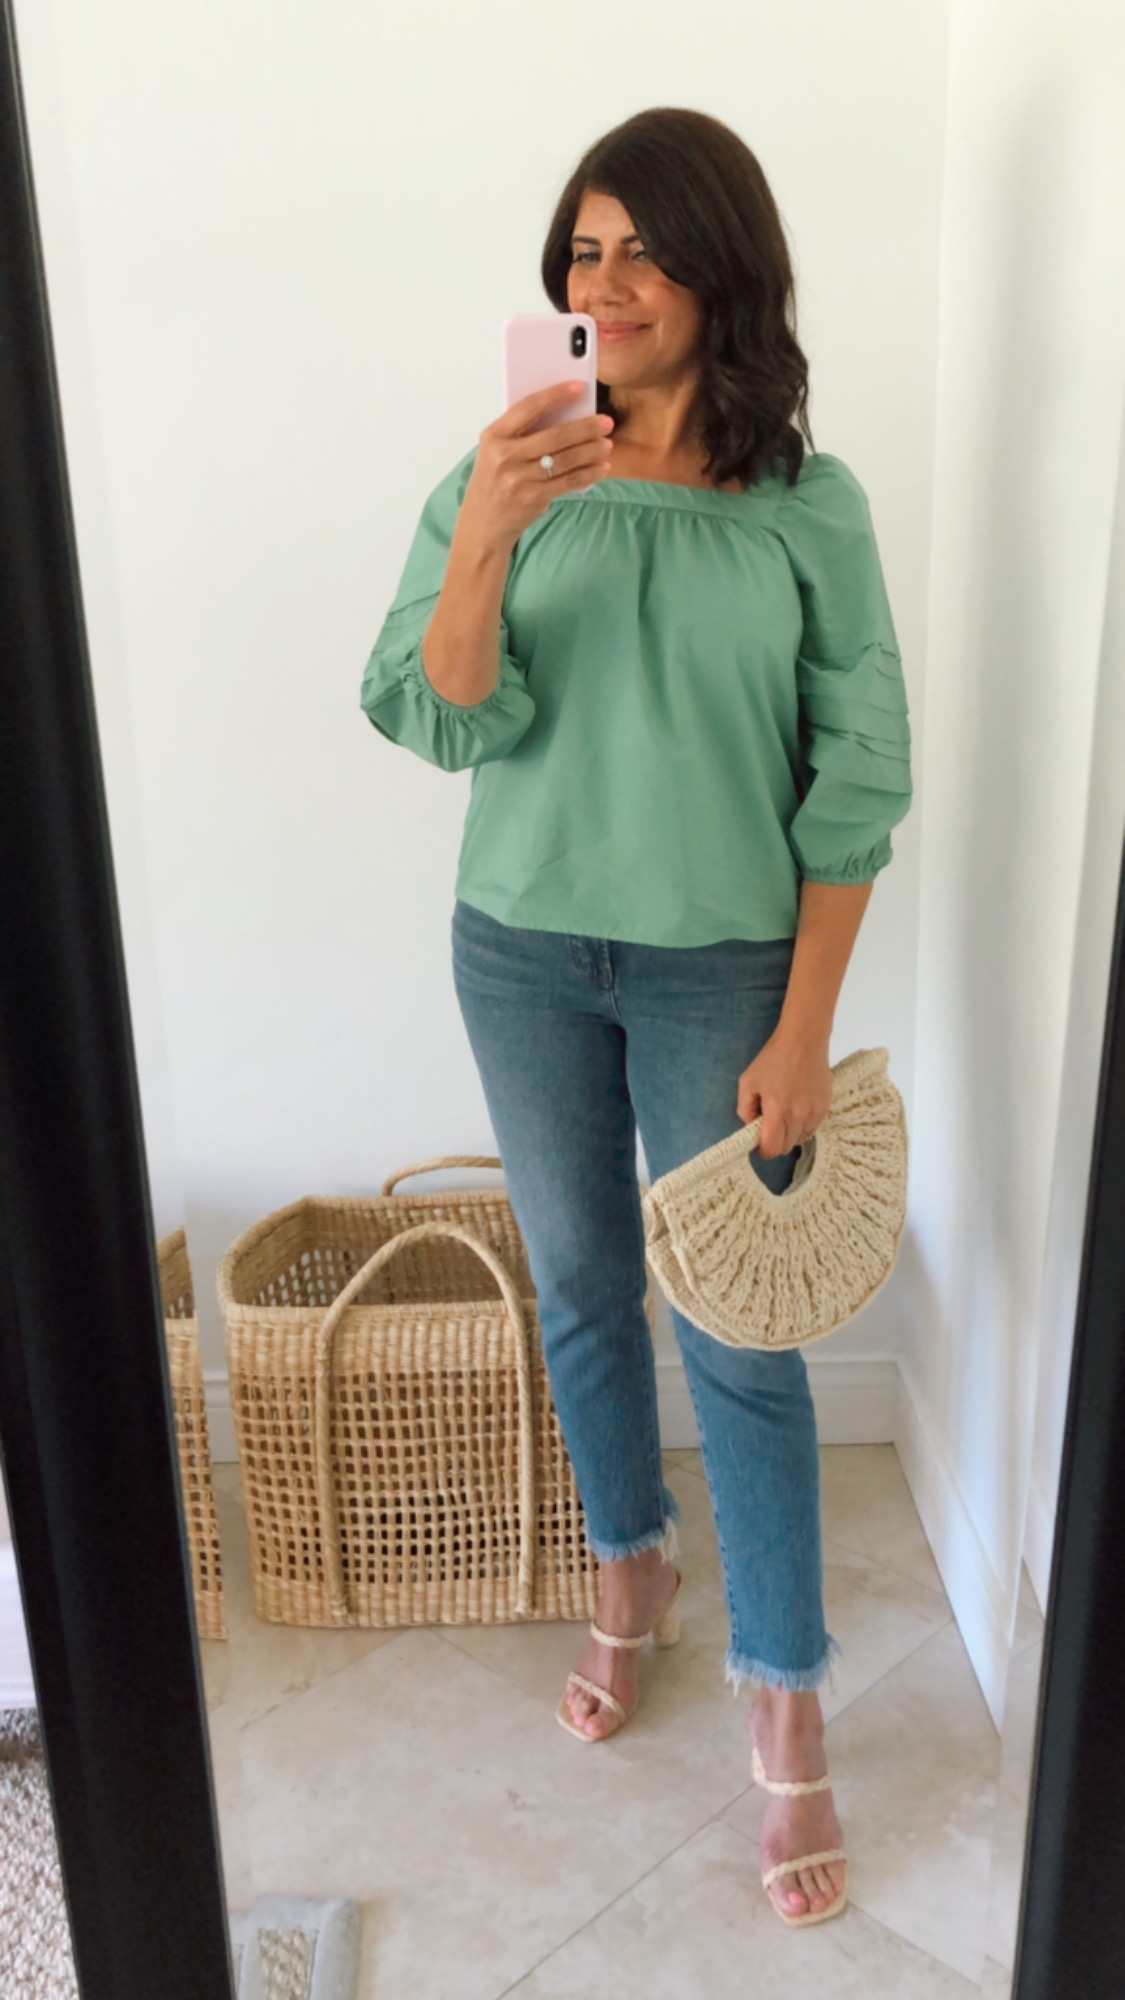 Desiree Leone of Beautifully Seaside features a mini spring try-on session. Shop the best vintage style jeans and three gorgeous tops for spring.